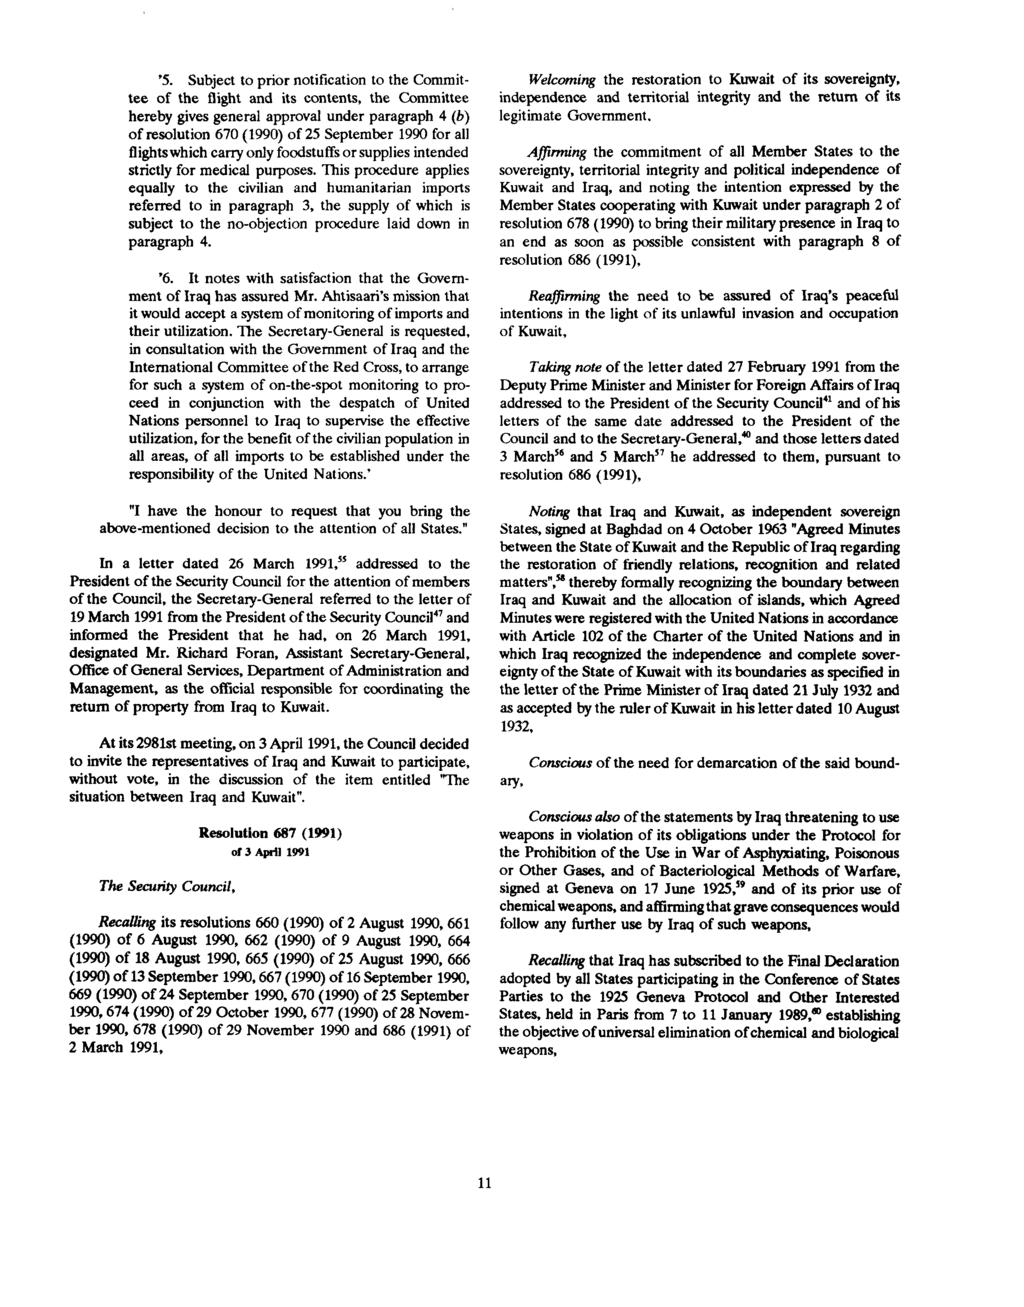 '5. Subject to prior notification to the Committee of the flight and its contents, the Committee hereby gives general approval under paragraph 4 (b) of resolution 670 (1990) of 25 September 1990 for